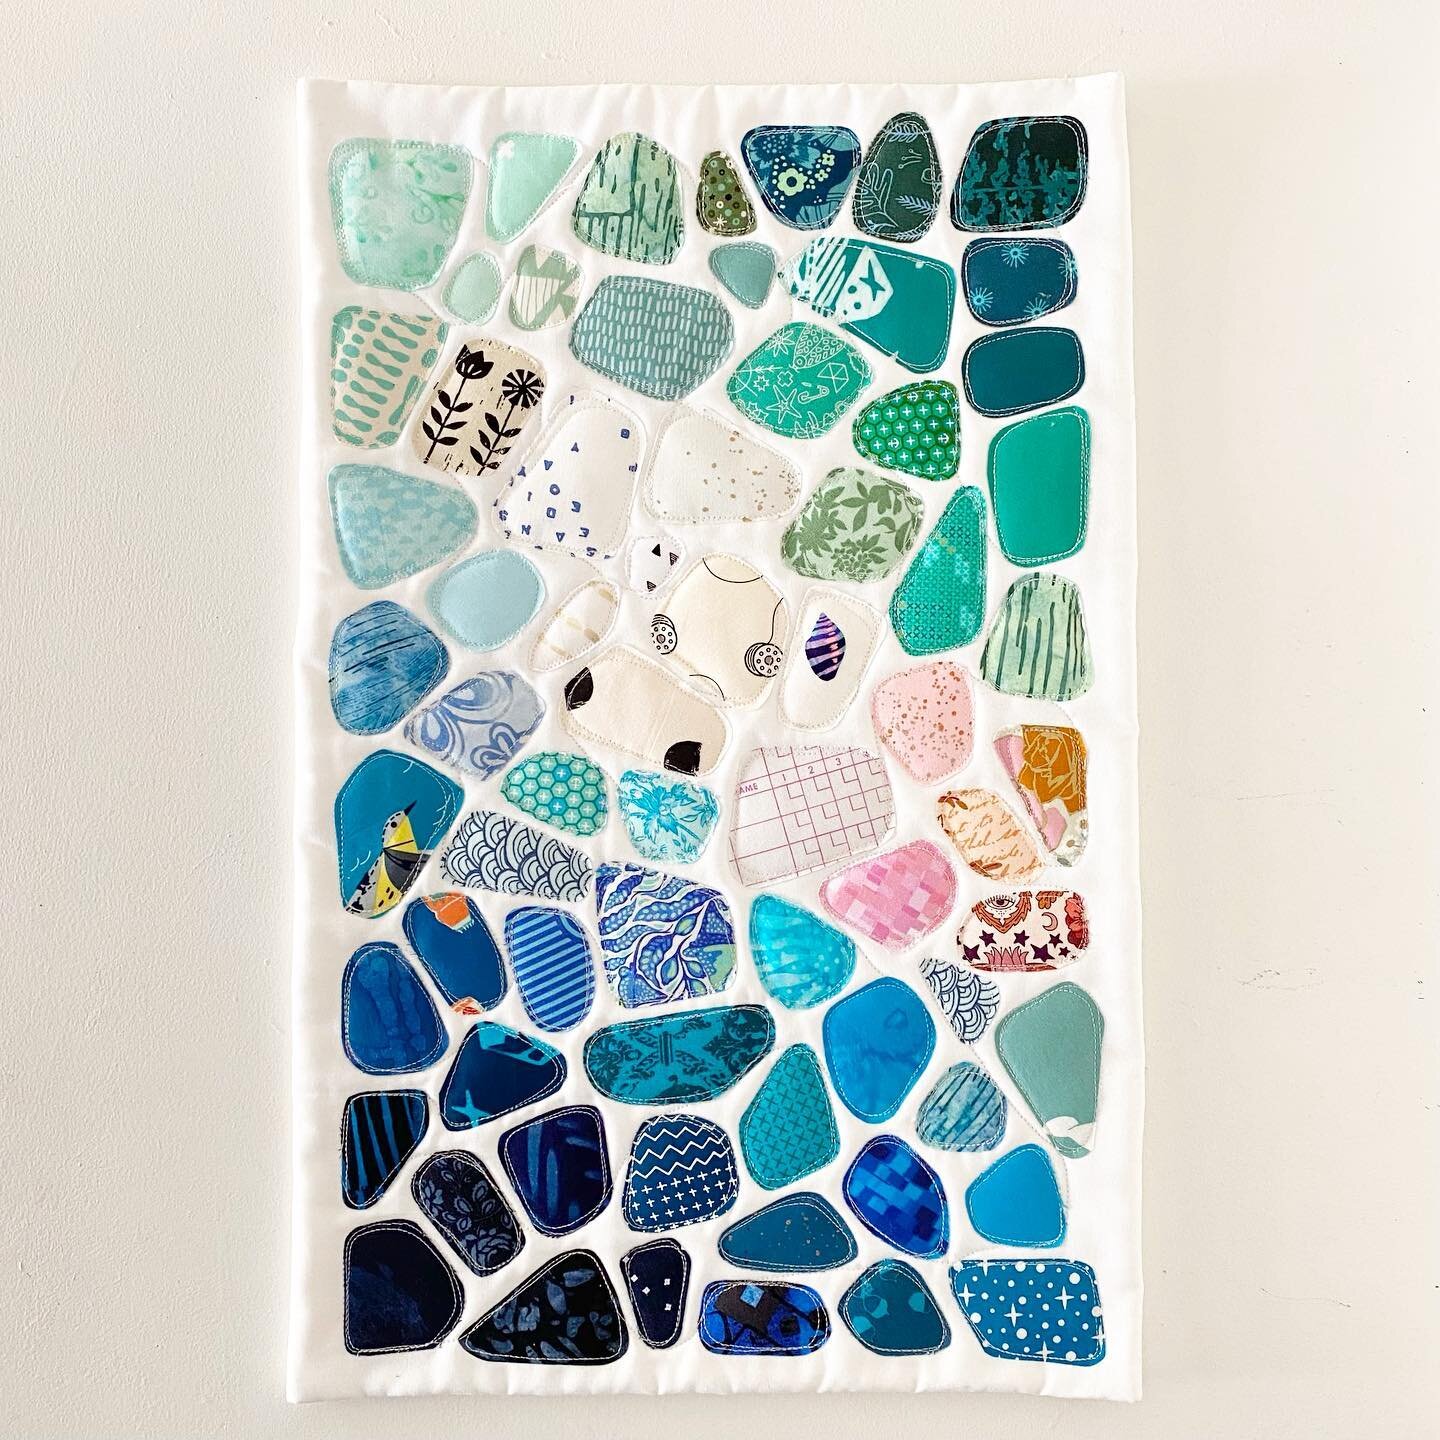 ⭐️ Labor Day Sale ⭐️⁣
⁣
My on demand seaglass class is 20% off from now until 9/9/22!⁣
⁣
Follow the link in my profile; the coupon is automatically applied.⁣
⁣
🪸⁣
⁣
If you&rsquo;re not into making your own, I&rsquo;m still prepping for my art quilt 